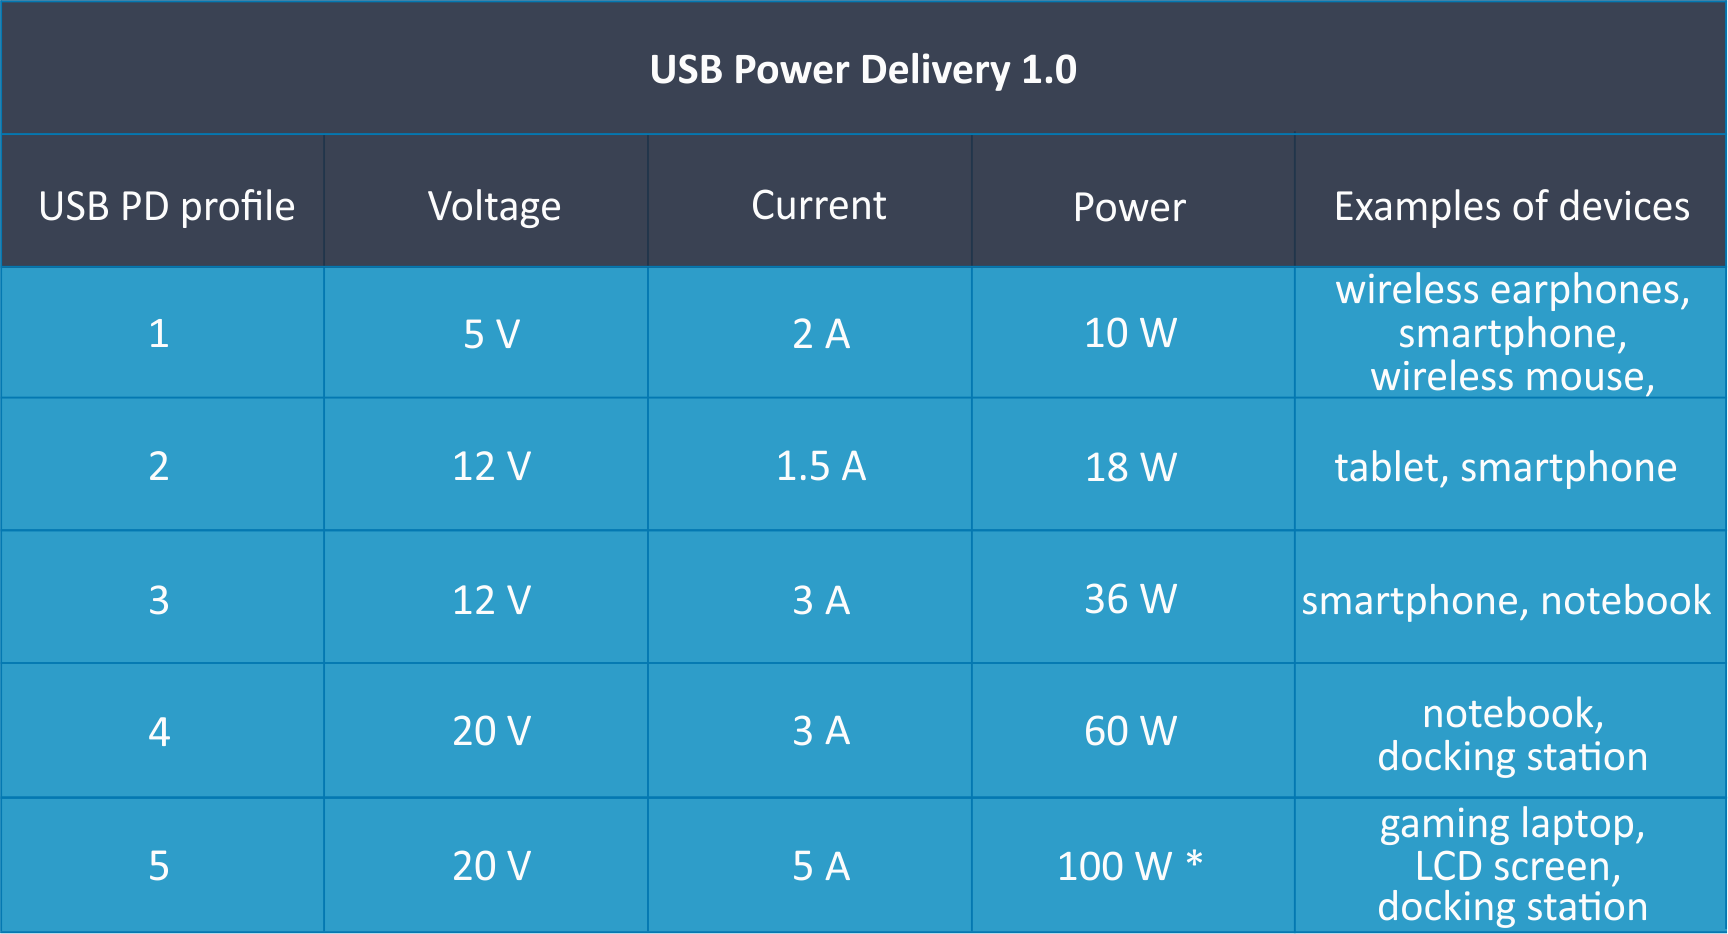 table with USB Power Delivery 1.0 parameters